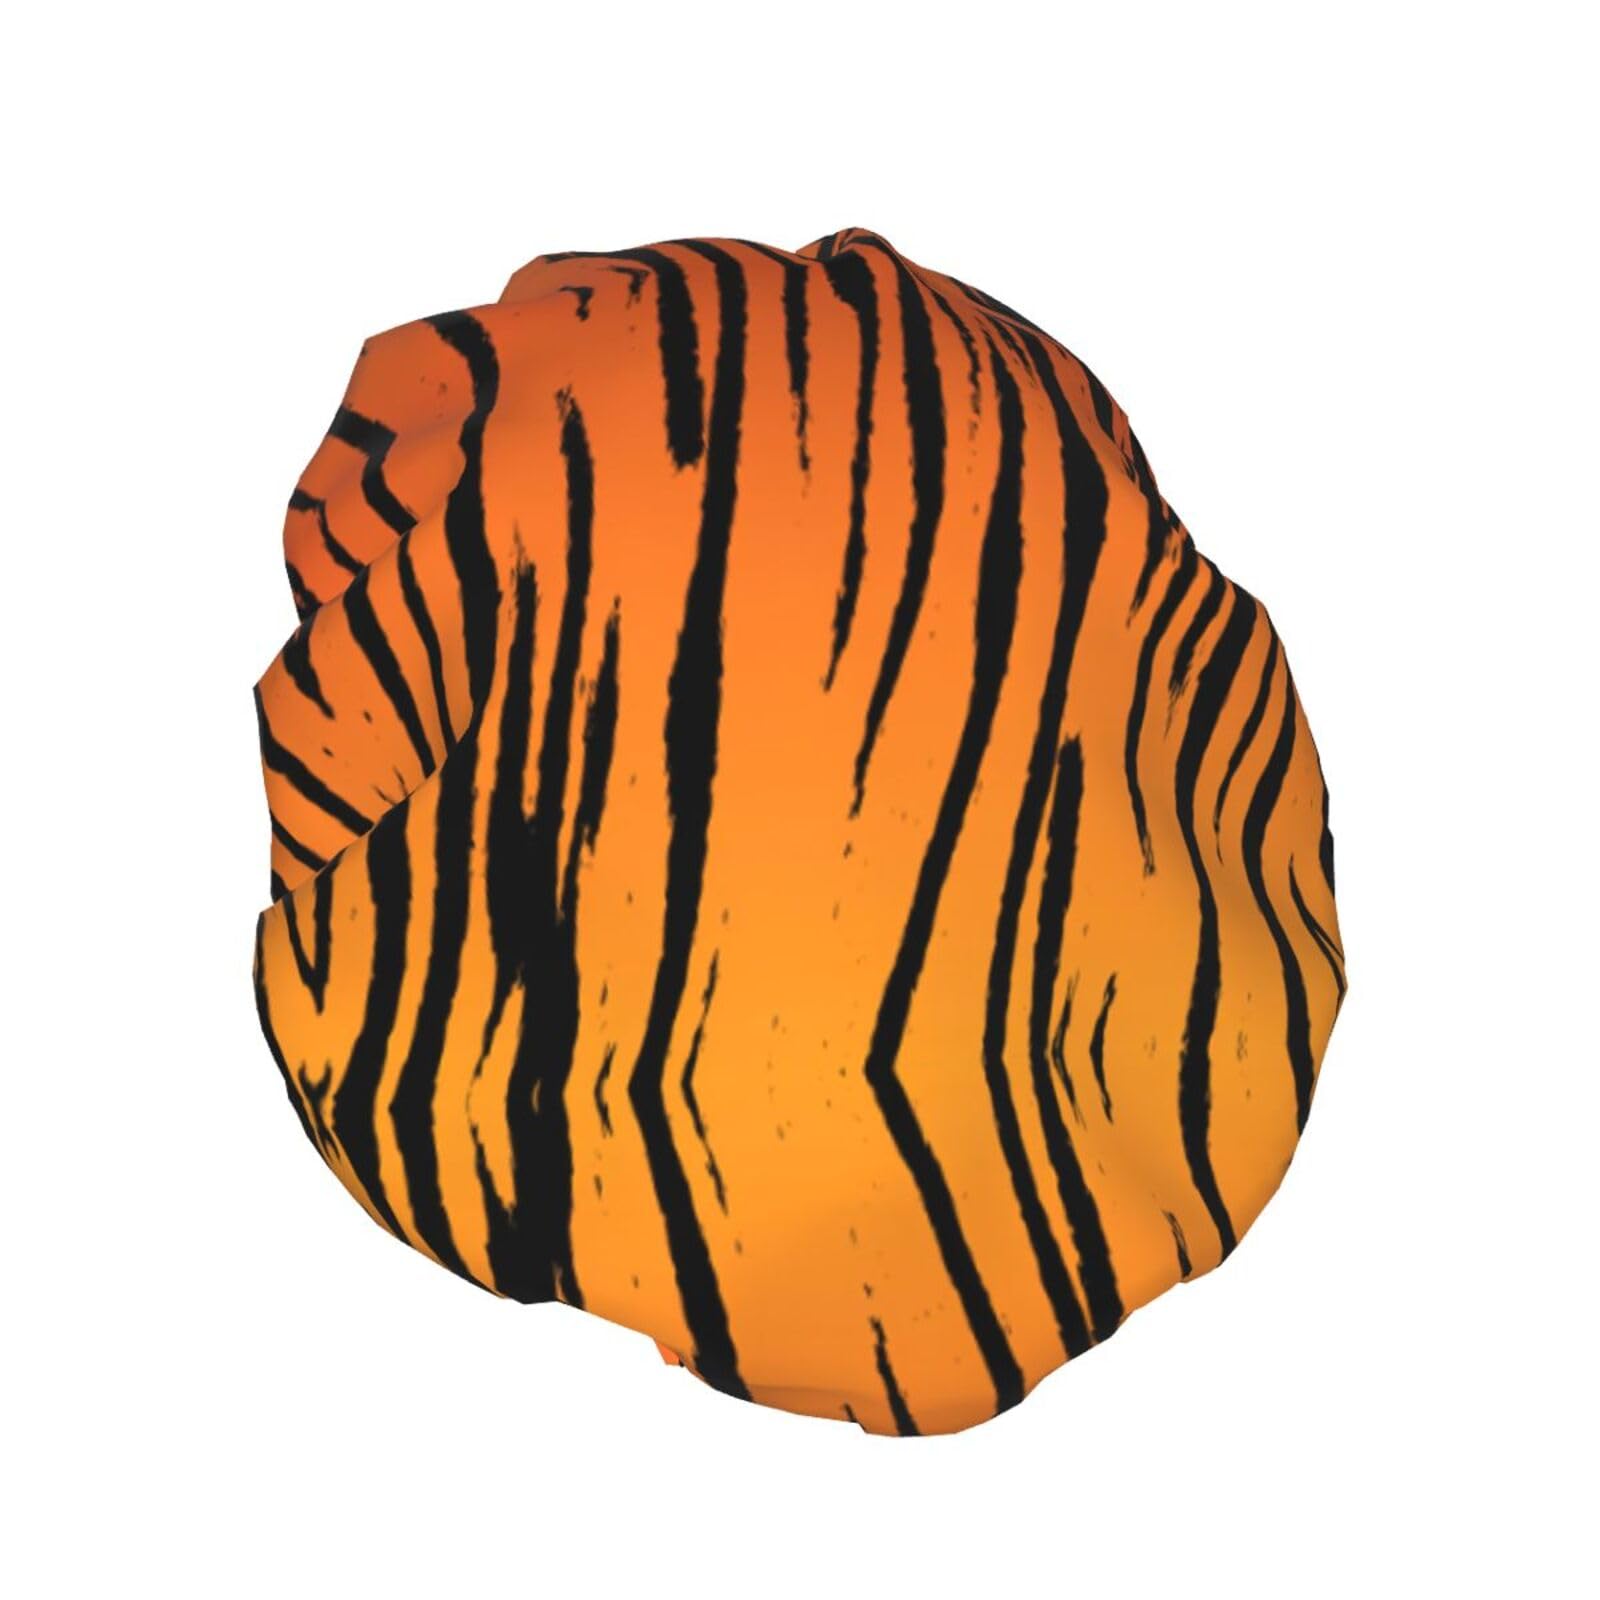 Double Layer Waterproof Shower Cap for Women,Portable Hair Protection for Long Hair,Versatile Bath Accessory Tiger Stripe